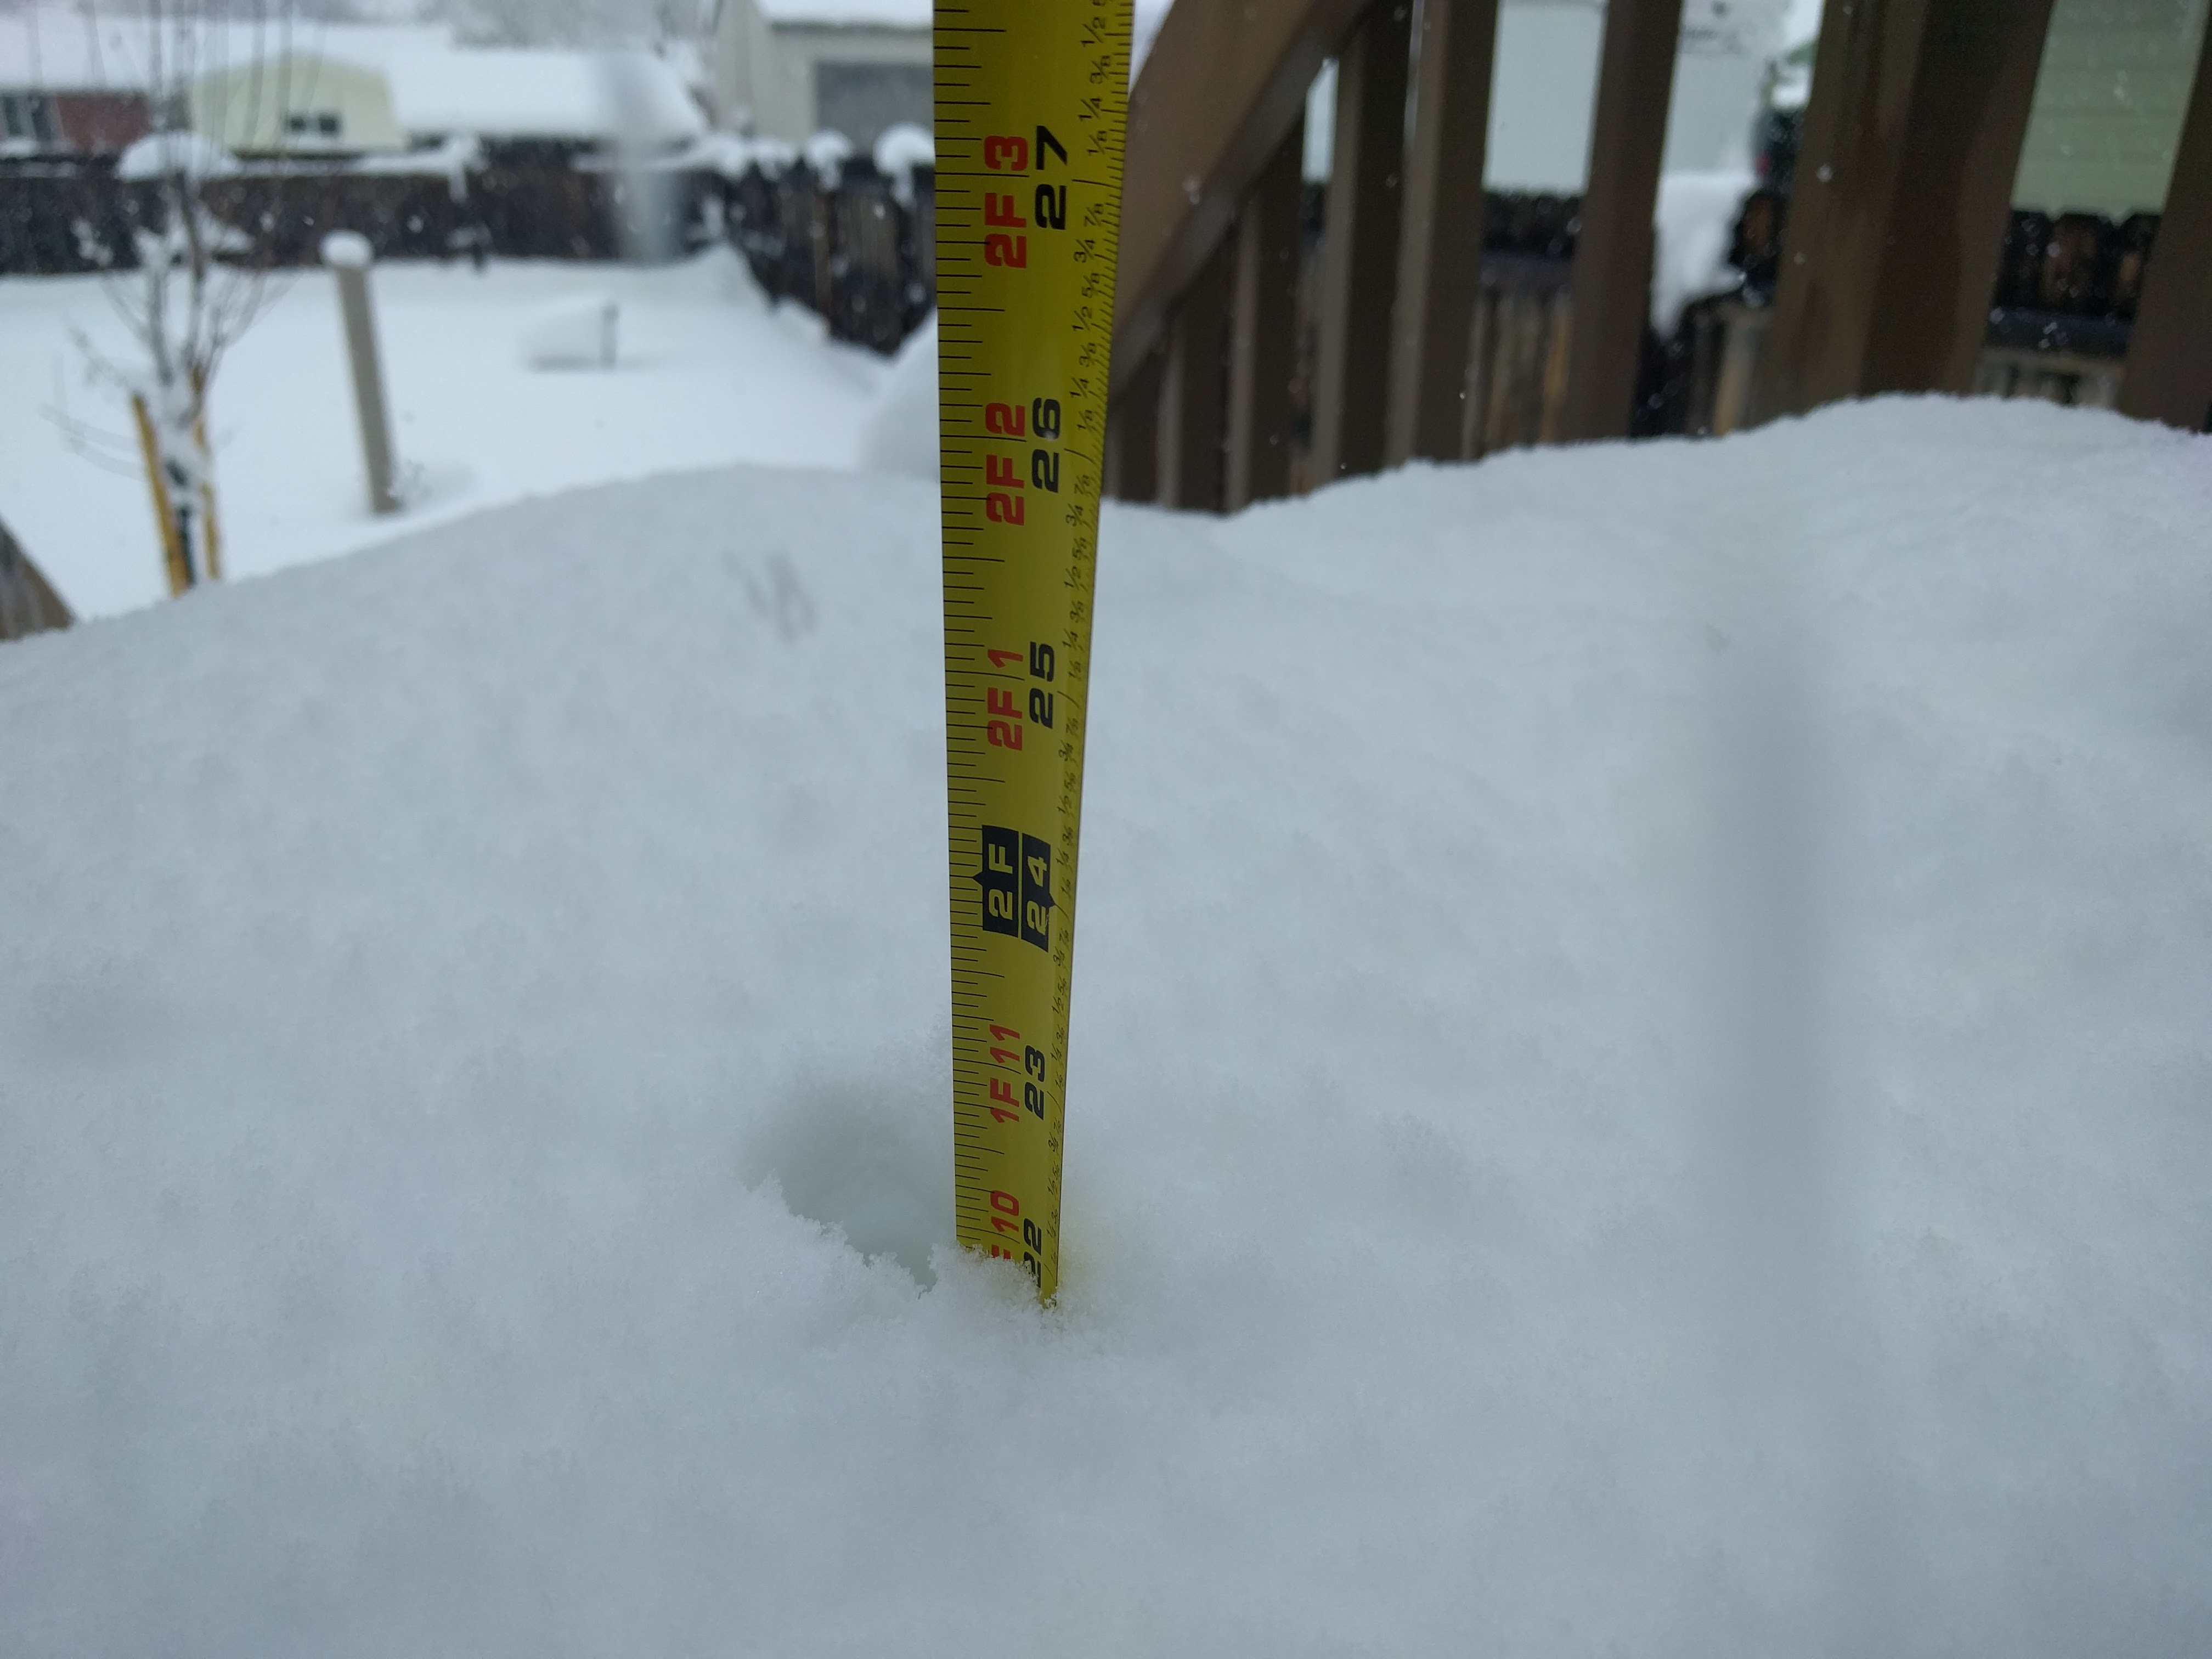 22 inches of snow